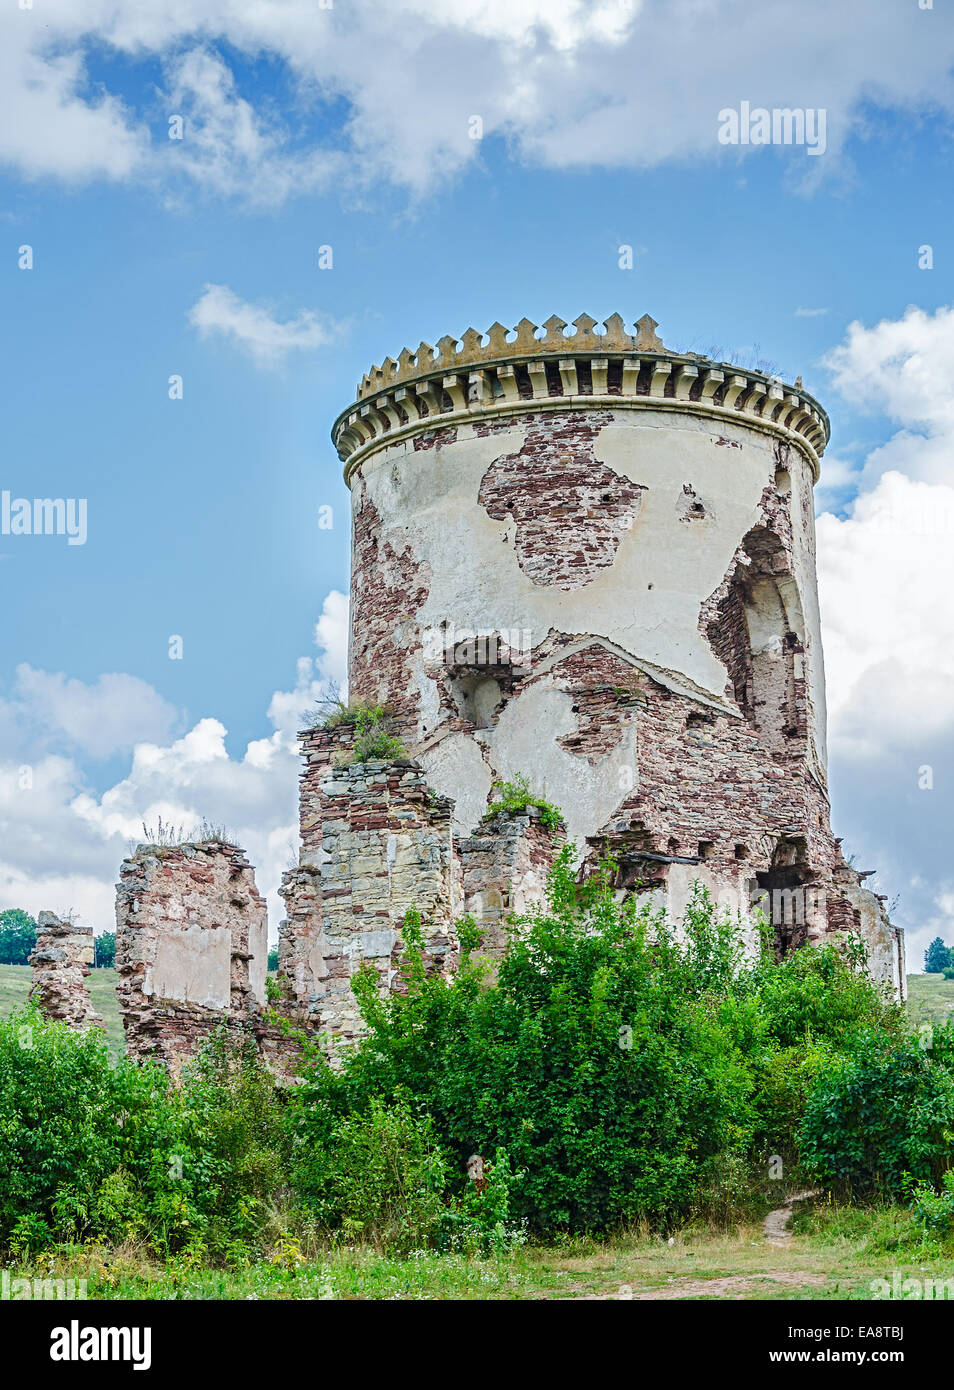 Ruins of old medieval tower in central Europe Stock Photo